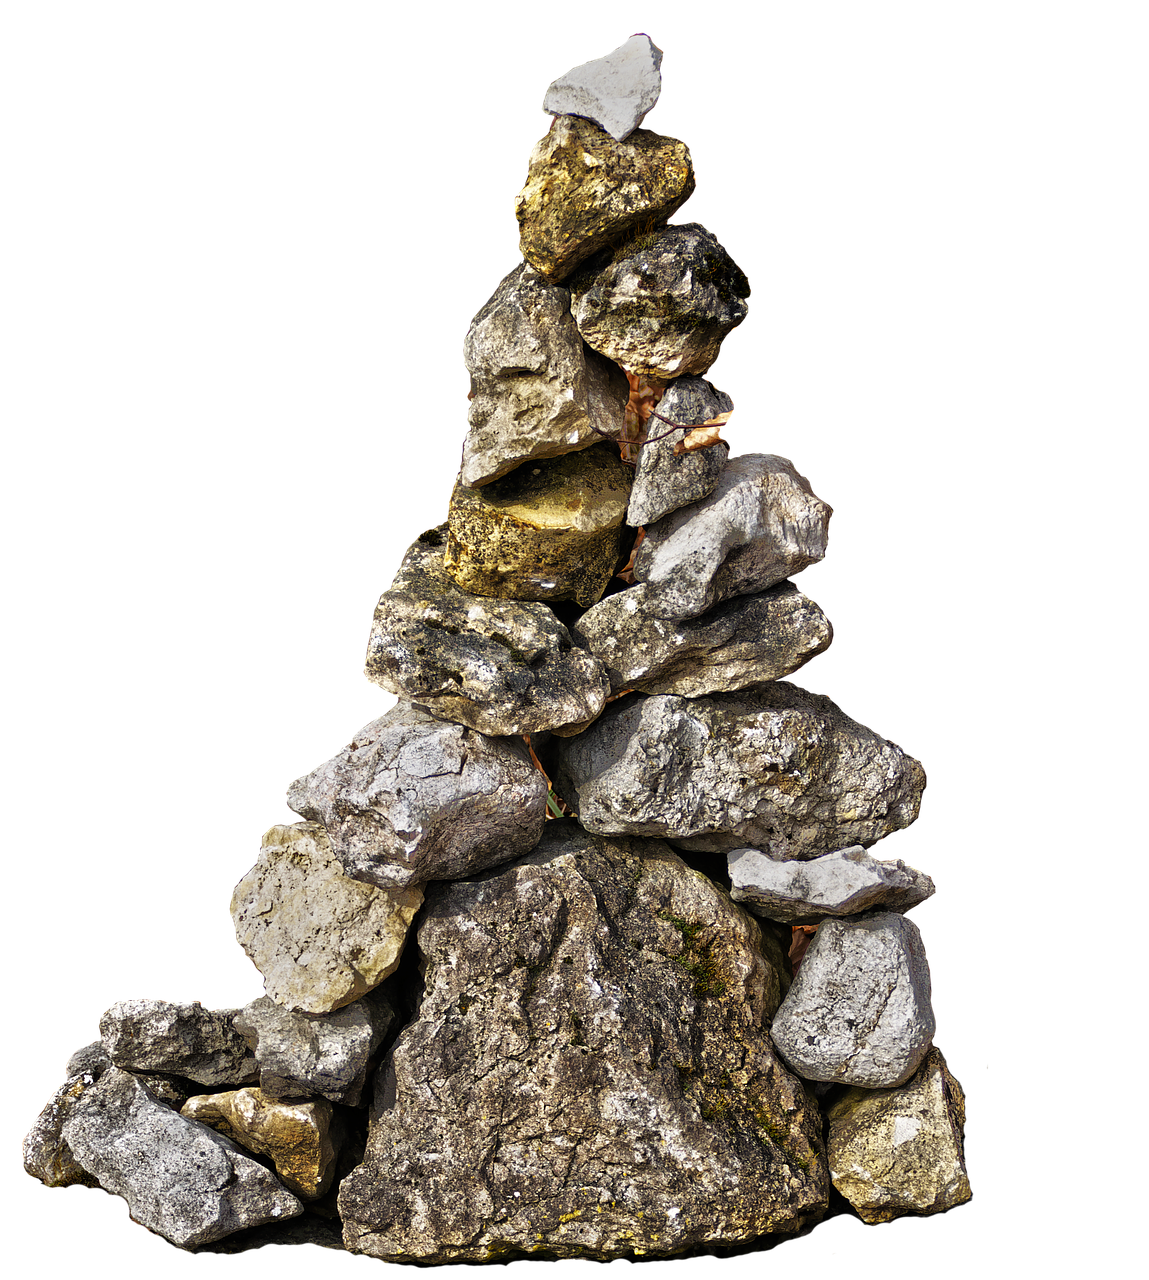 A Pile Of Rocks Stacked On Top Of Each Other